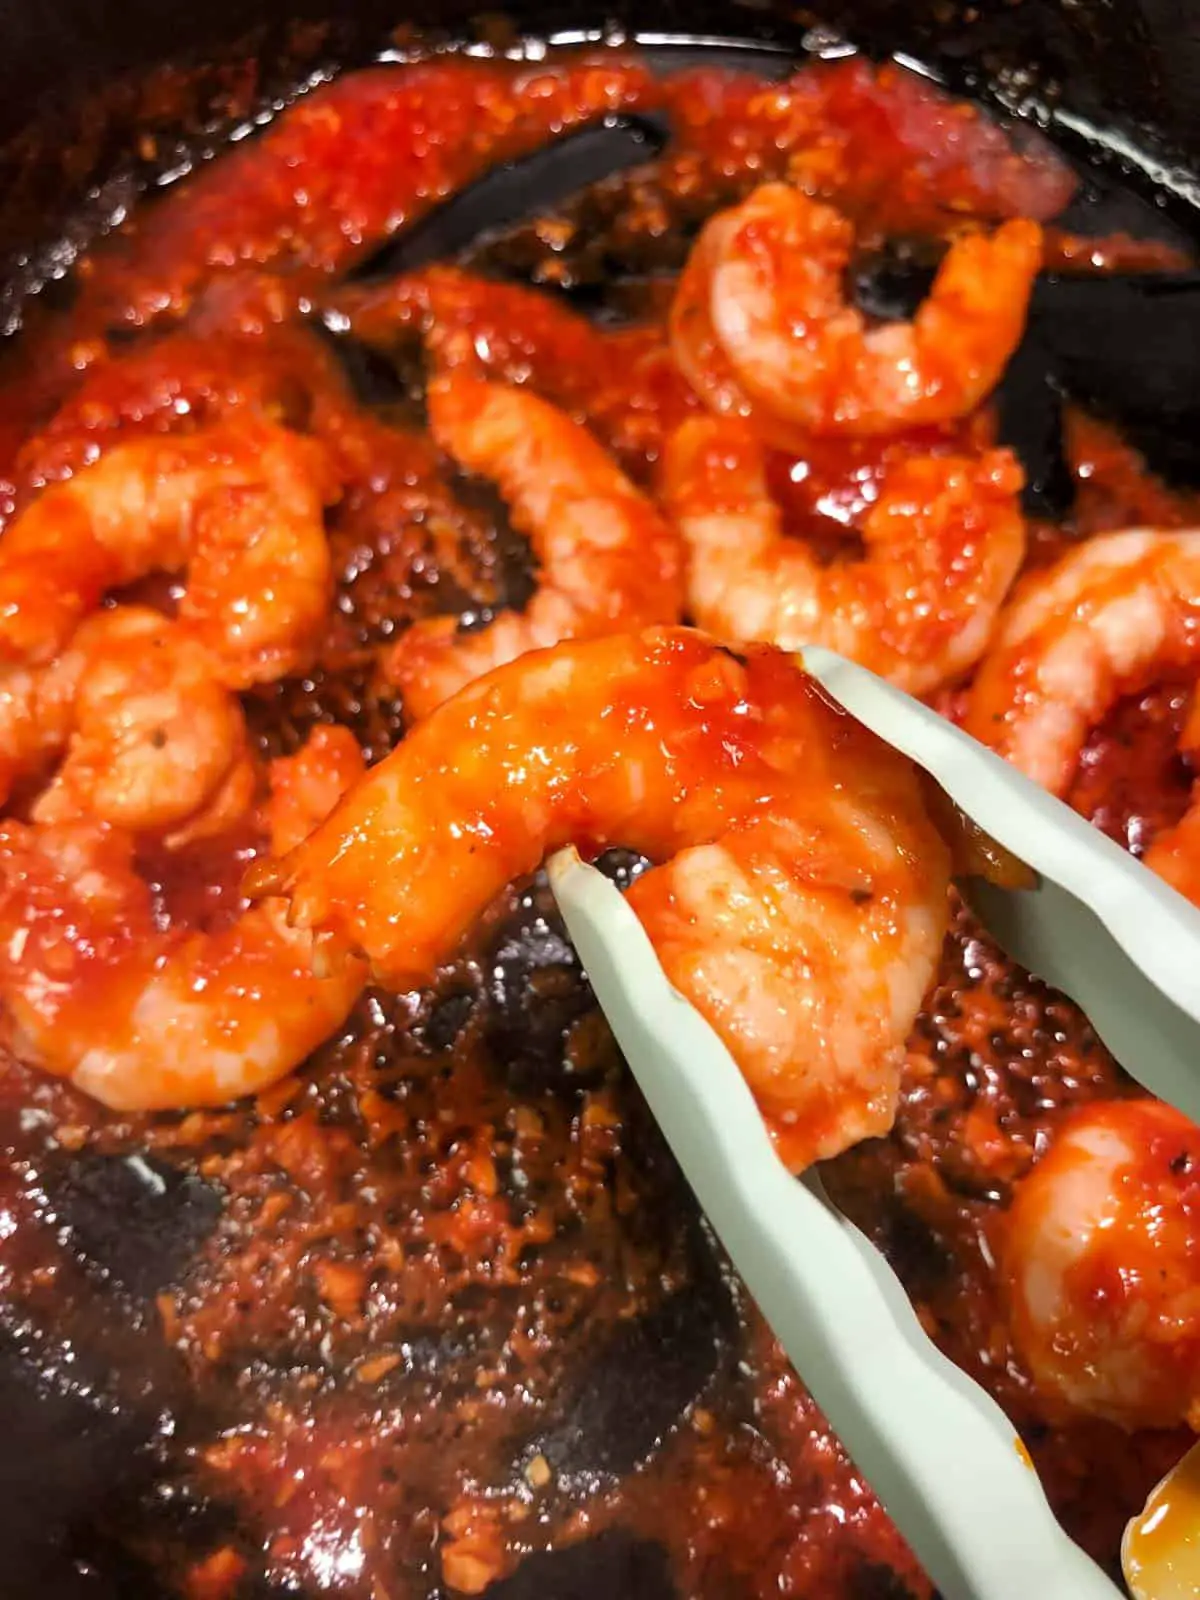 Red pieces of shrimp that have been coated with tomato paste with blue tongs holding one piece of shrimp.